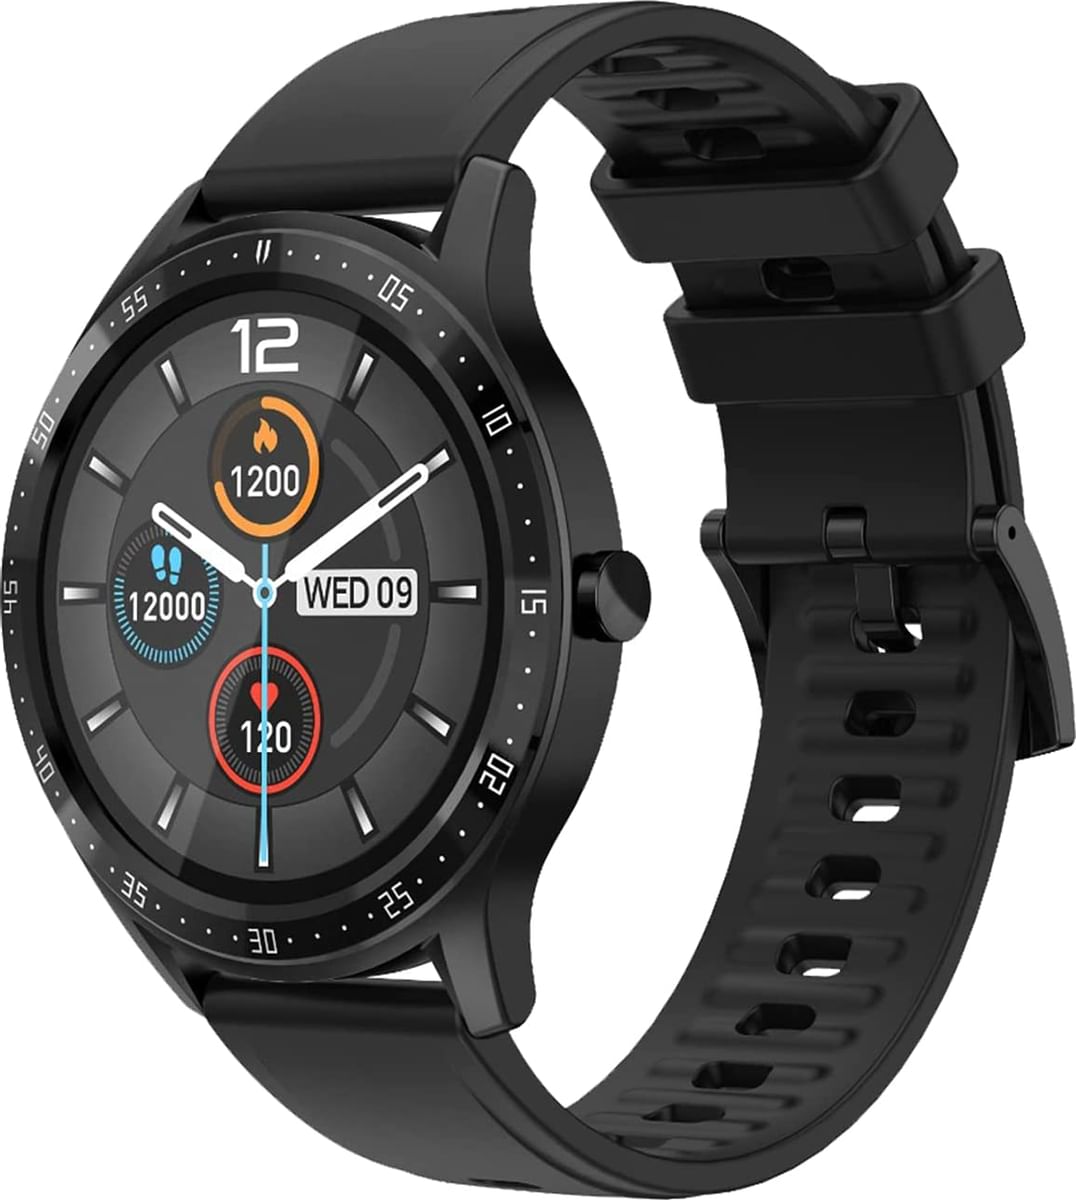 Fire Boltt 360 Smartwatch Best Price in India 2022, Specs & Review